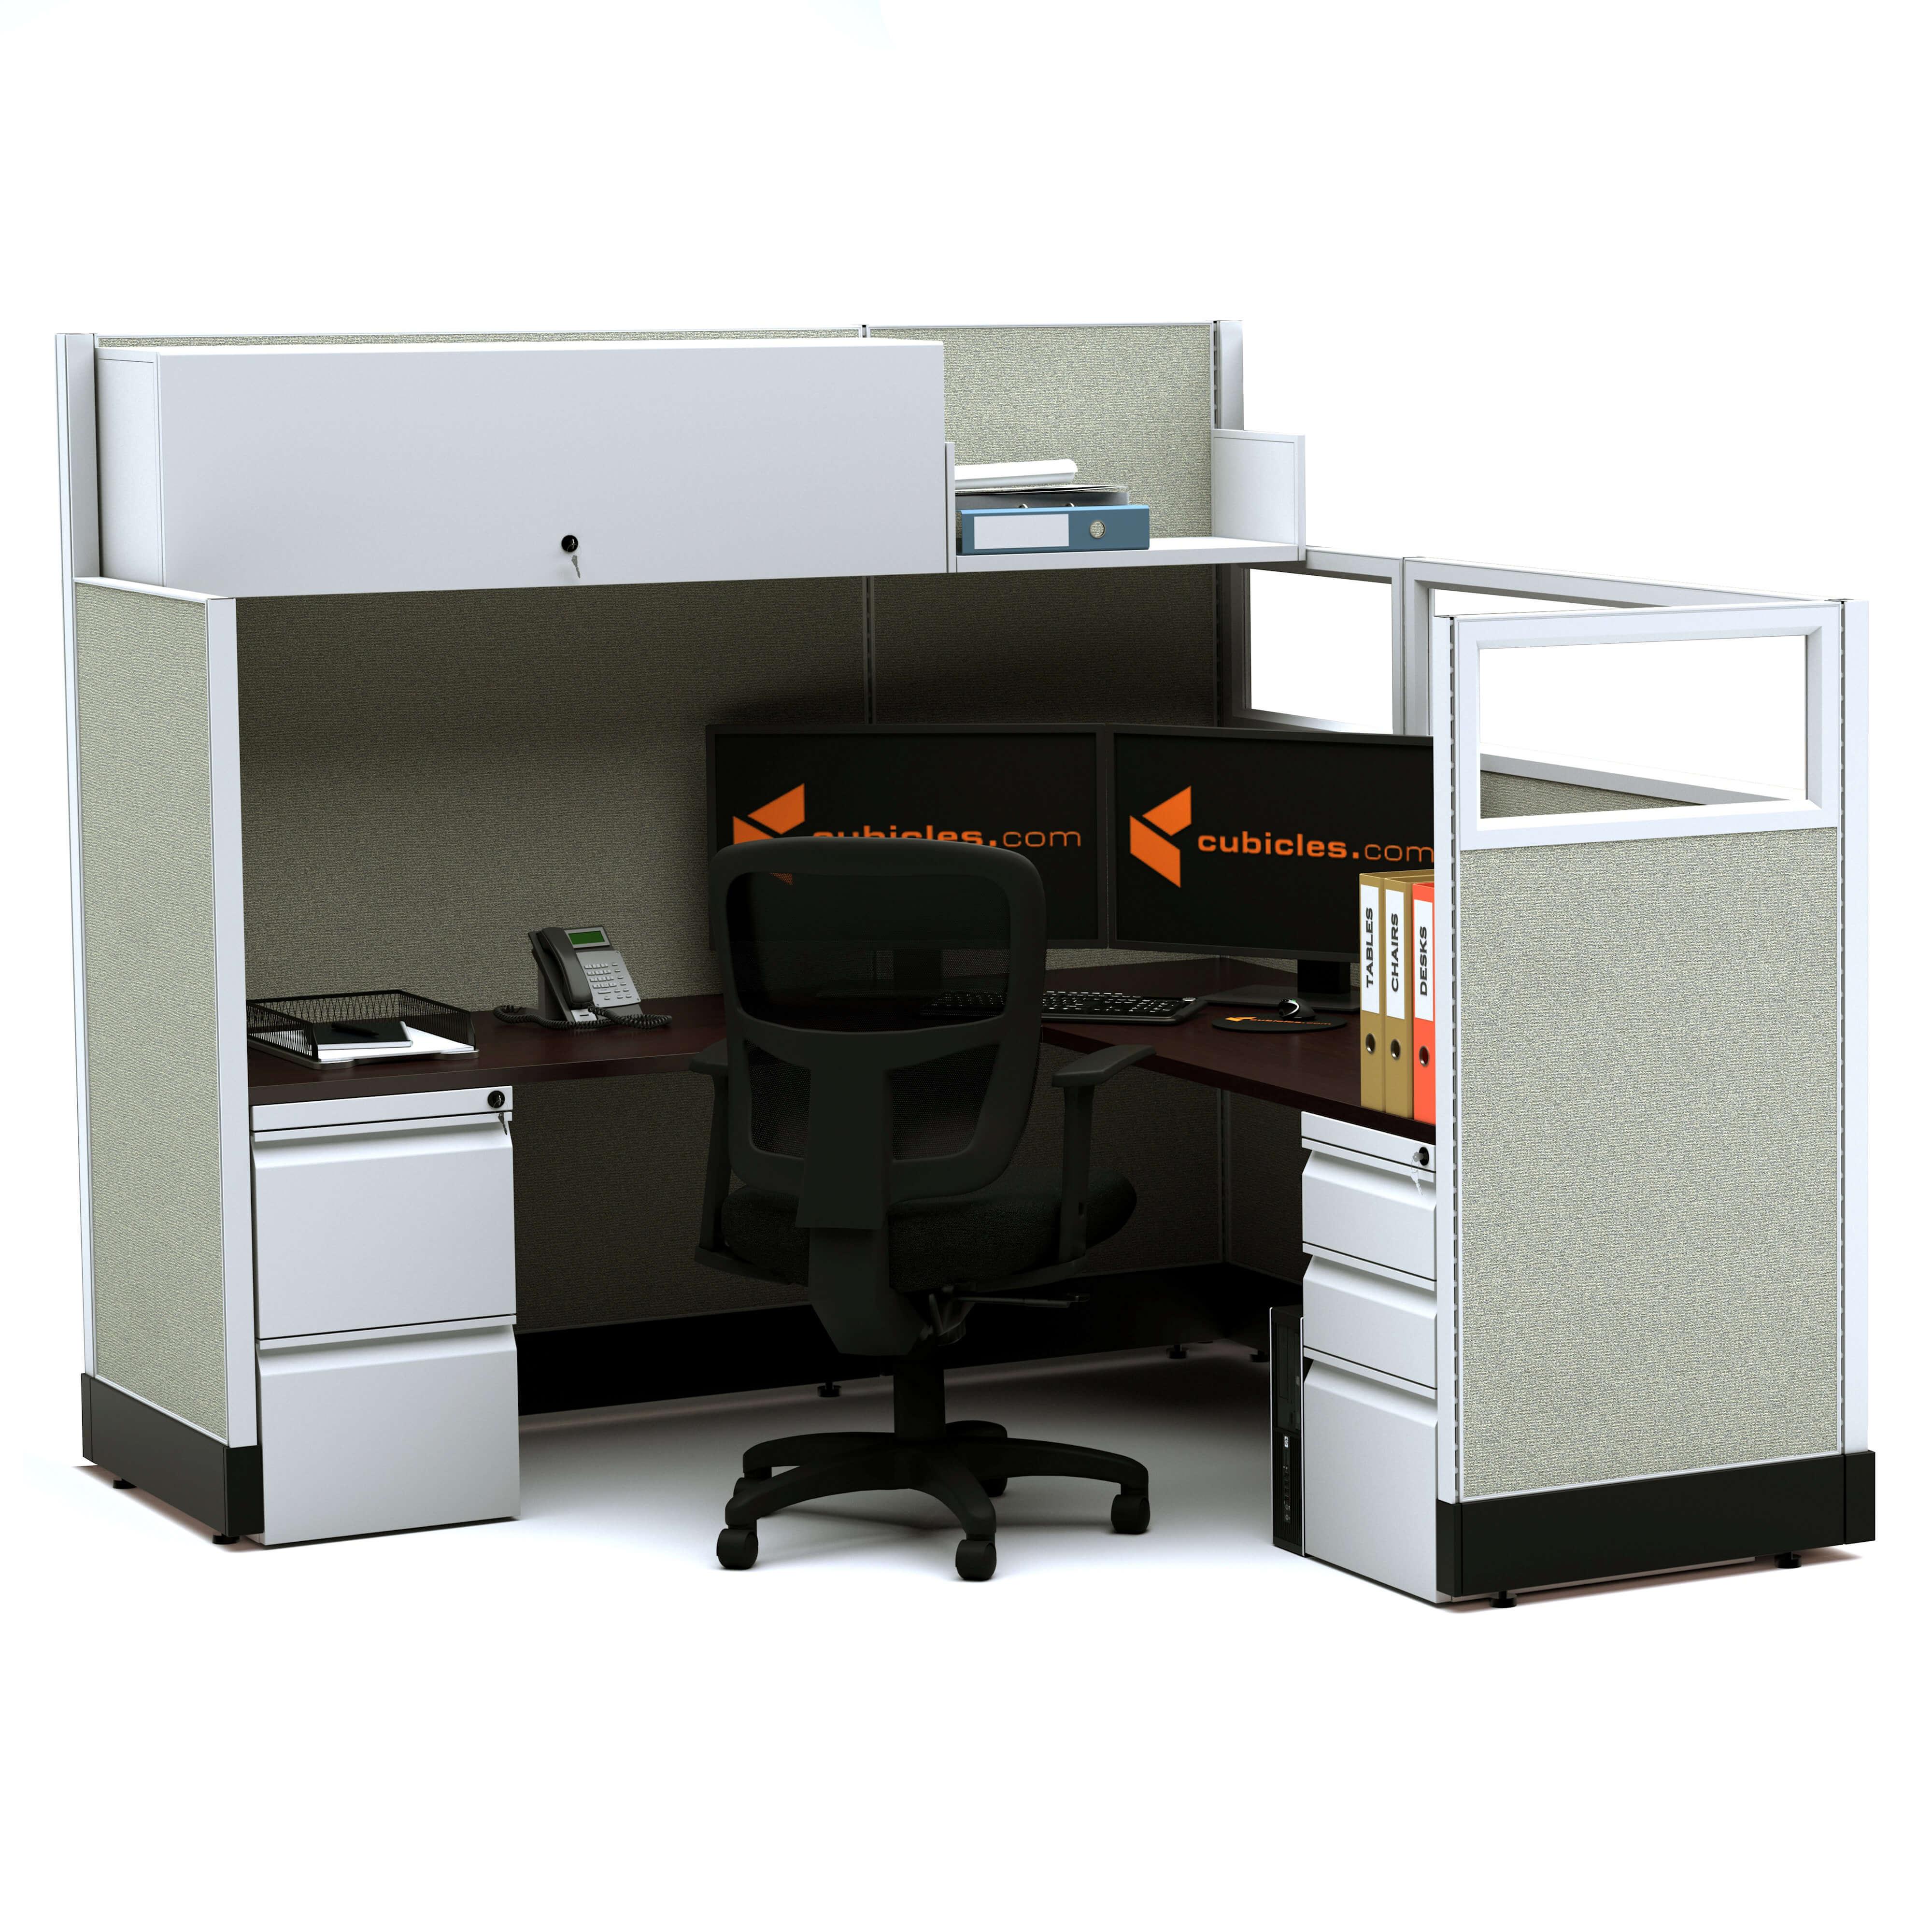 modular-office-furniture-partial-glass-office-cubicles-53-67h-single-powered.jpg